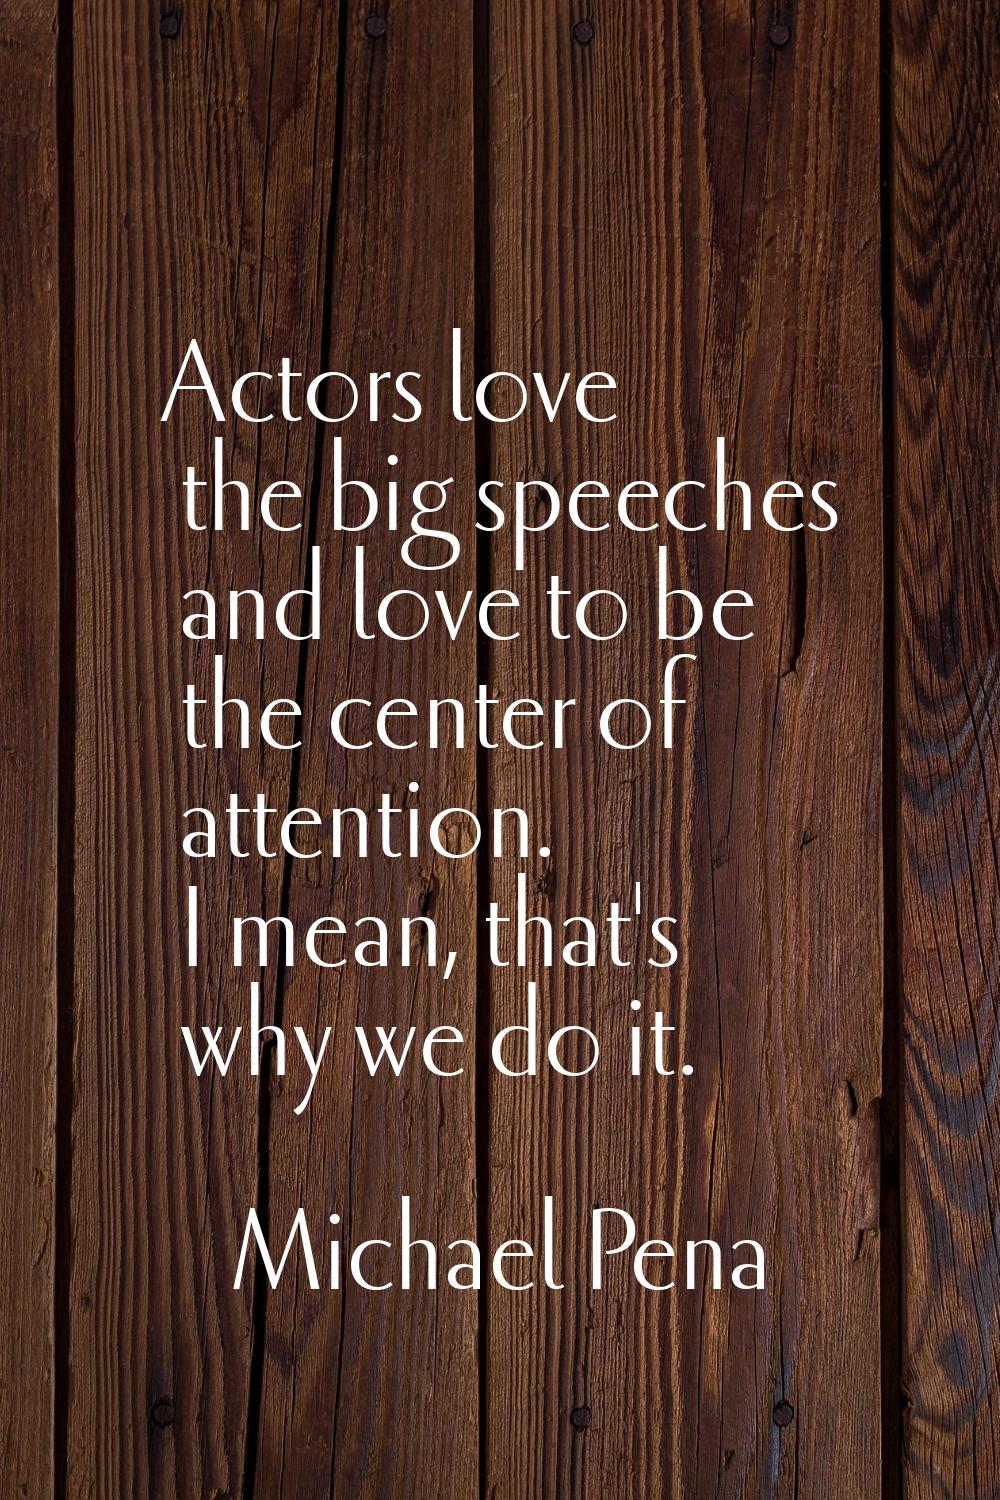 Actors love the big speeches and love to be the center of attention. I mean, that's why we do it.